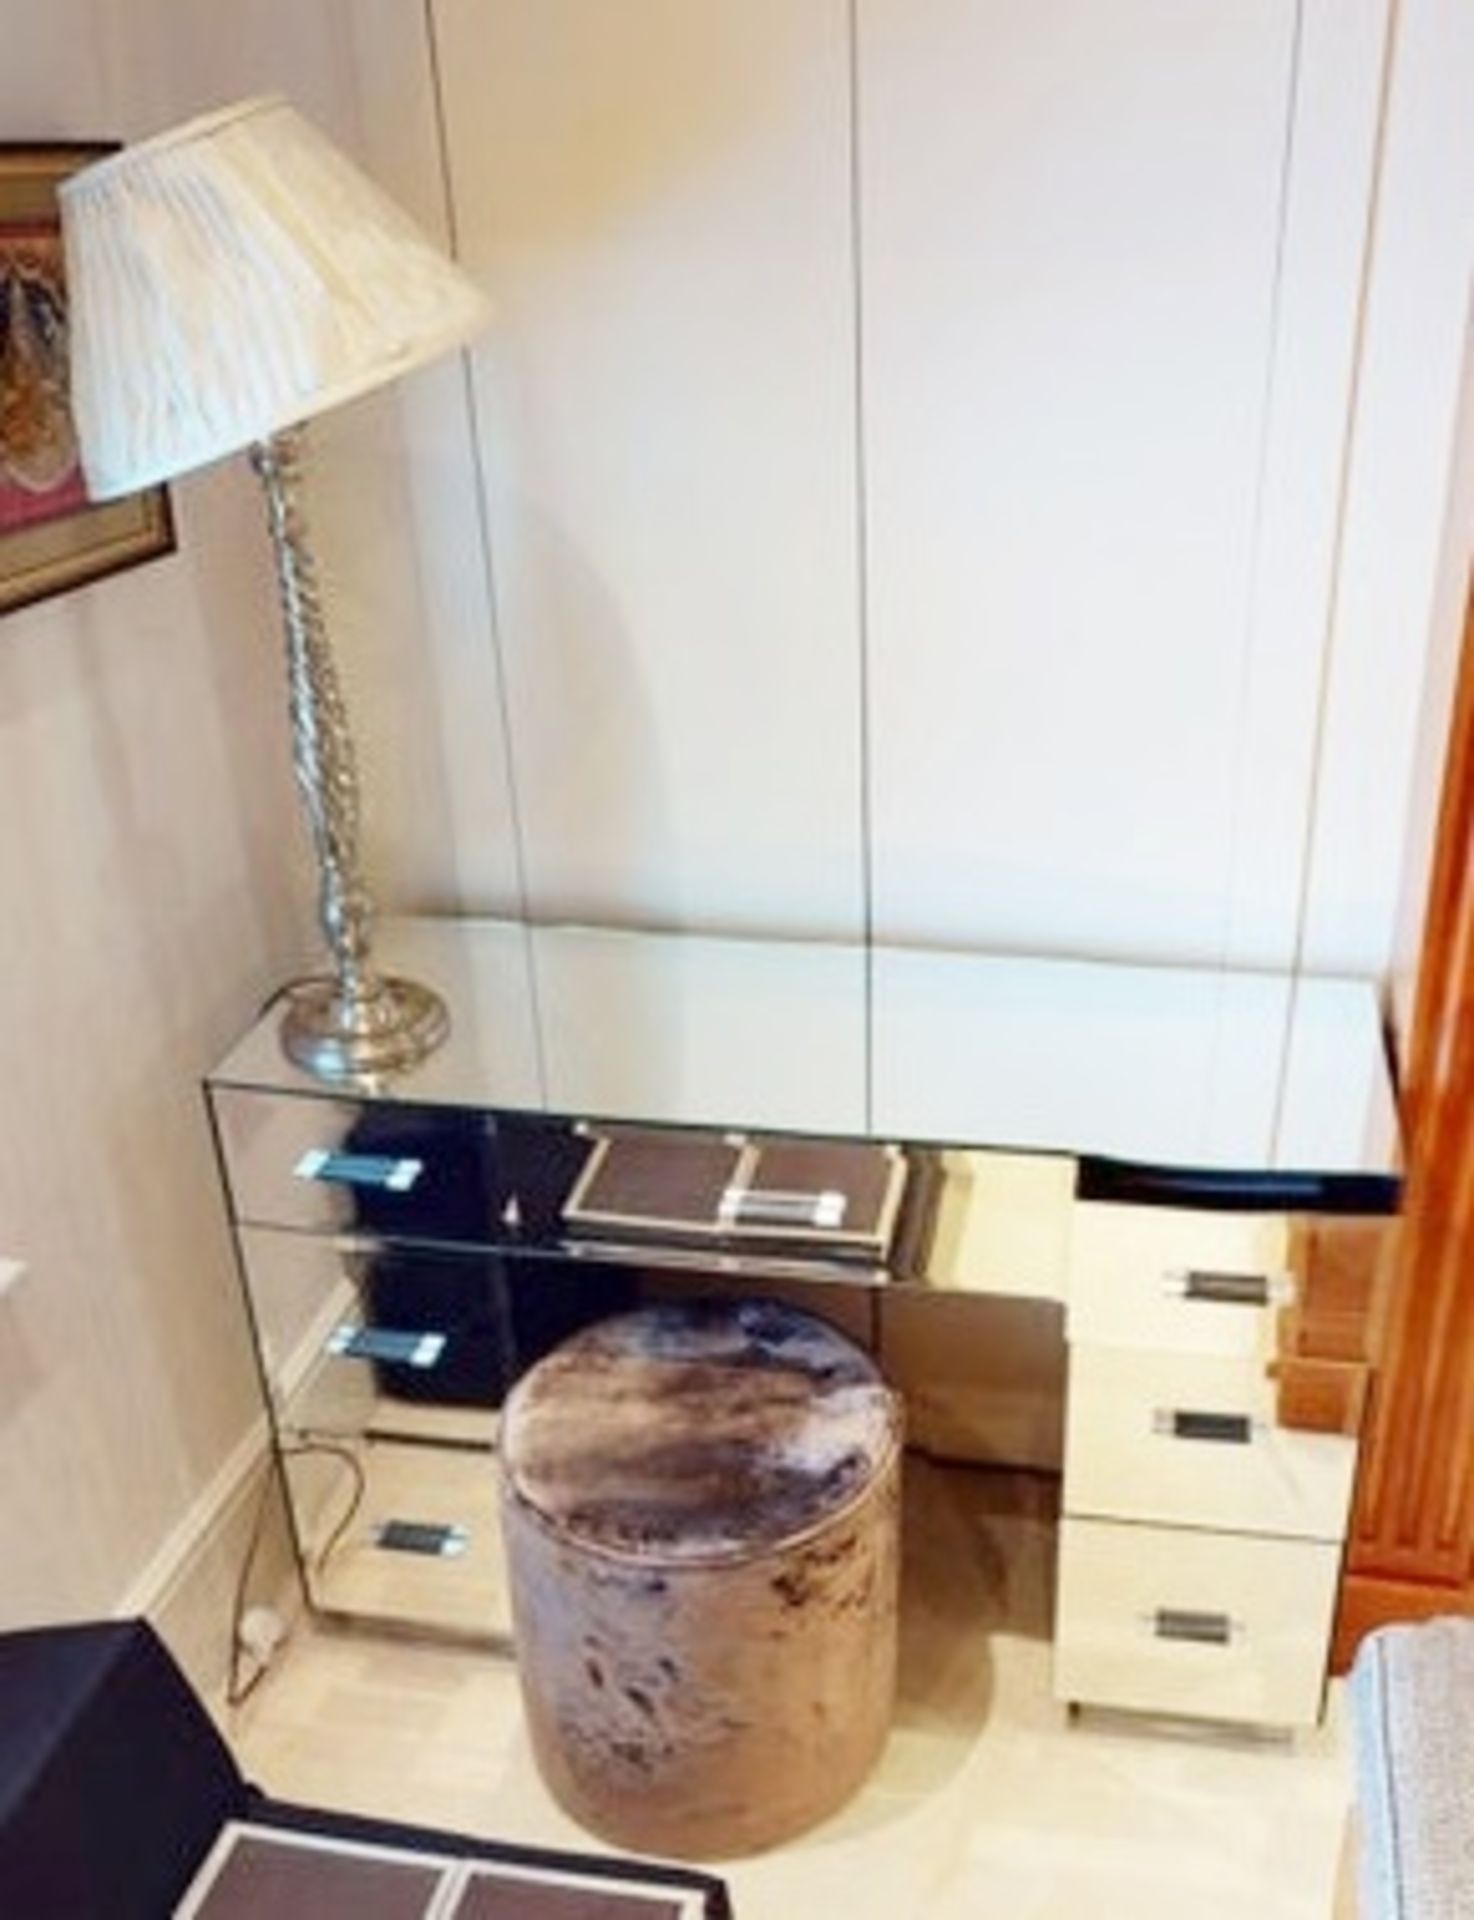 1 x Mirrored Dressing Table And Lamp To Be Removed From An Exclusive Property In Bowdon  - CL691- - Image 2 of 3